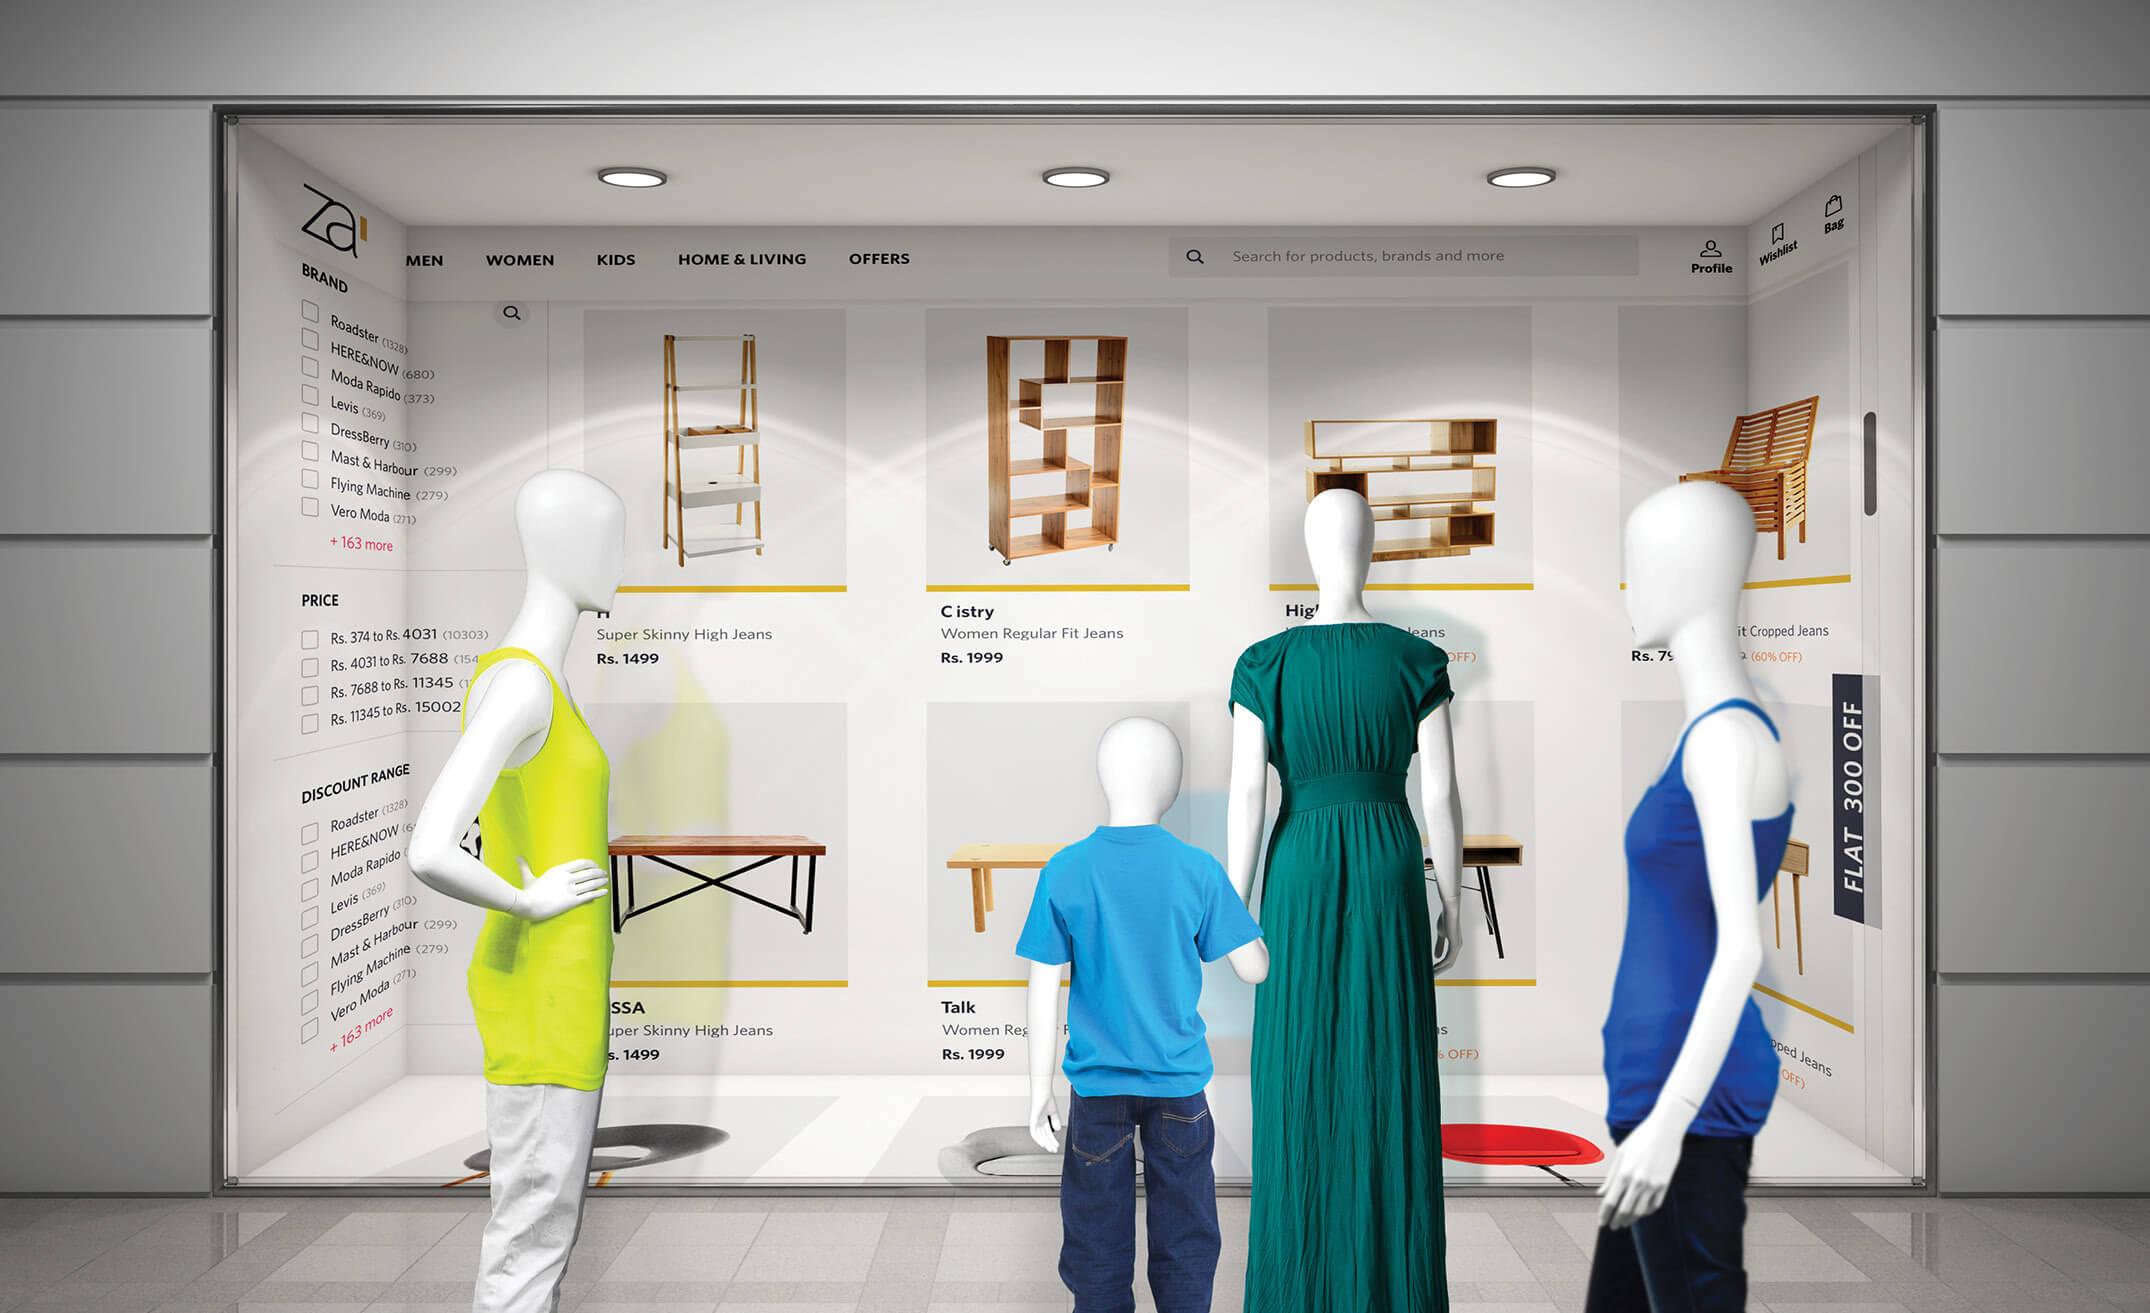 The Complete Guide to Online Visual Merchandising